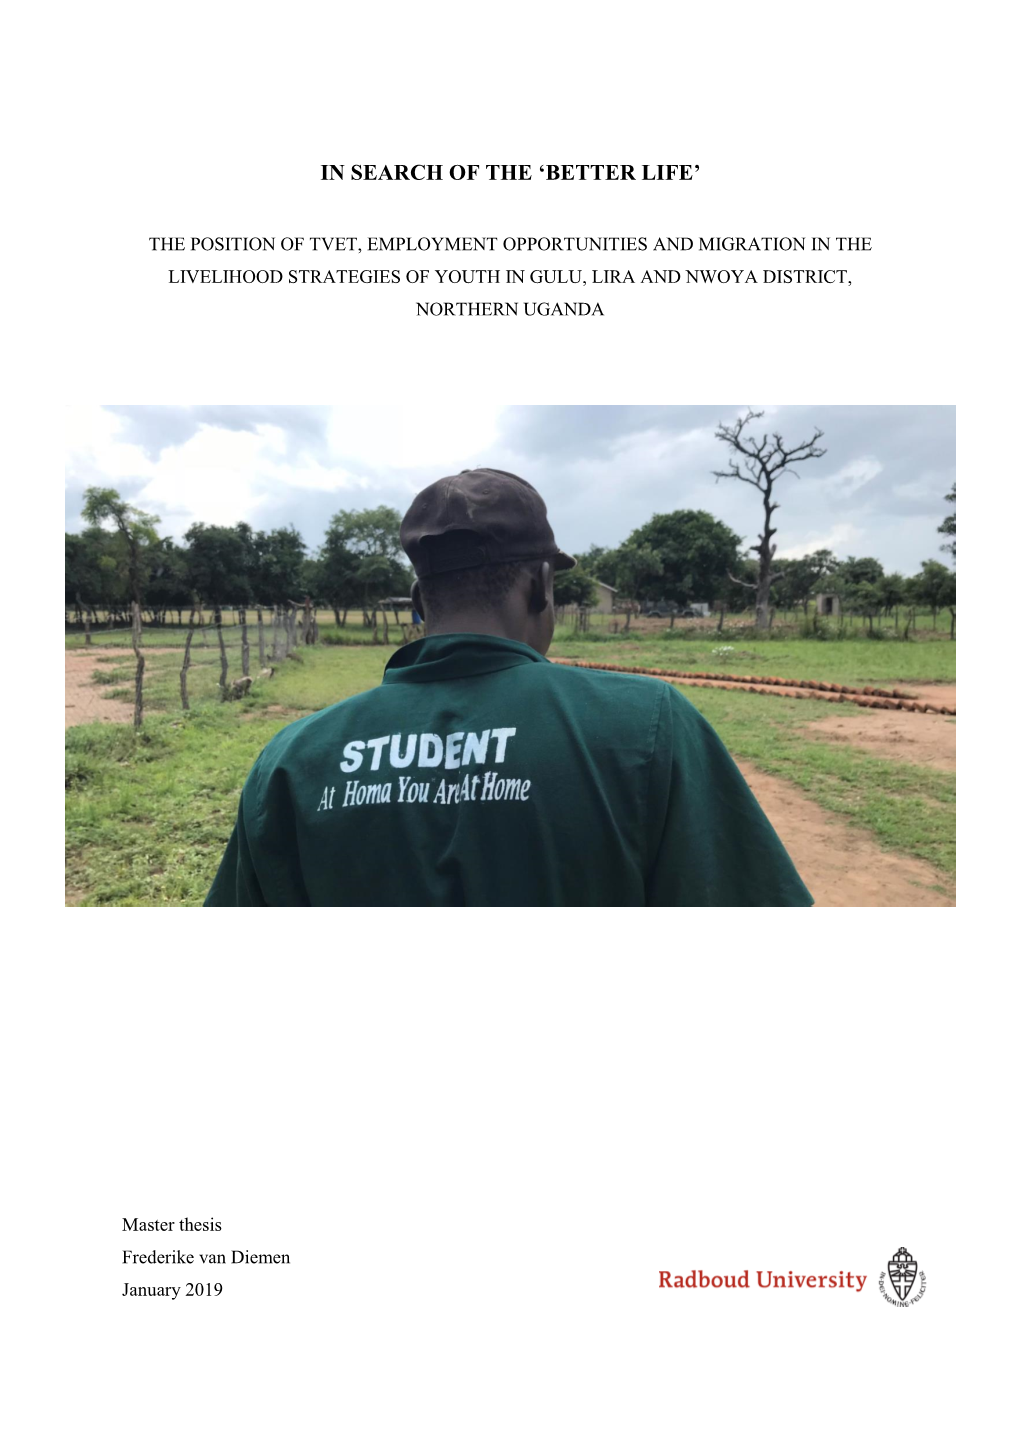 The Position of Tvet, Employment Opportunities and Migration in the Livelihood Strategies of Youth in Gulu, Lira and Nwoya District, Northern Uganda